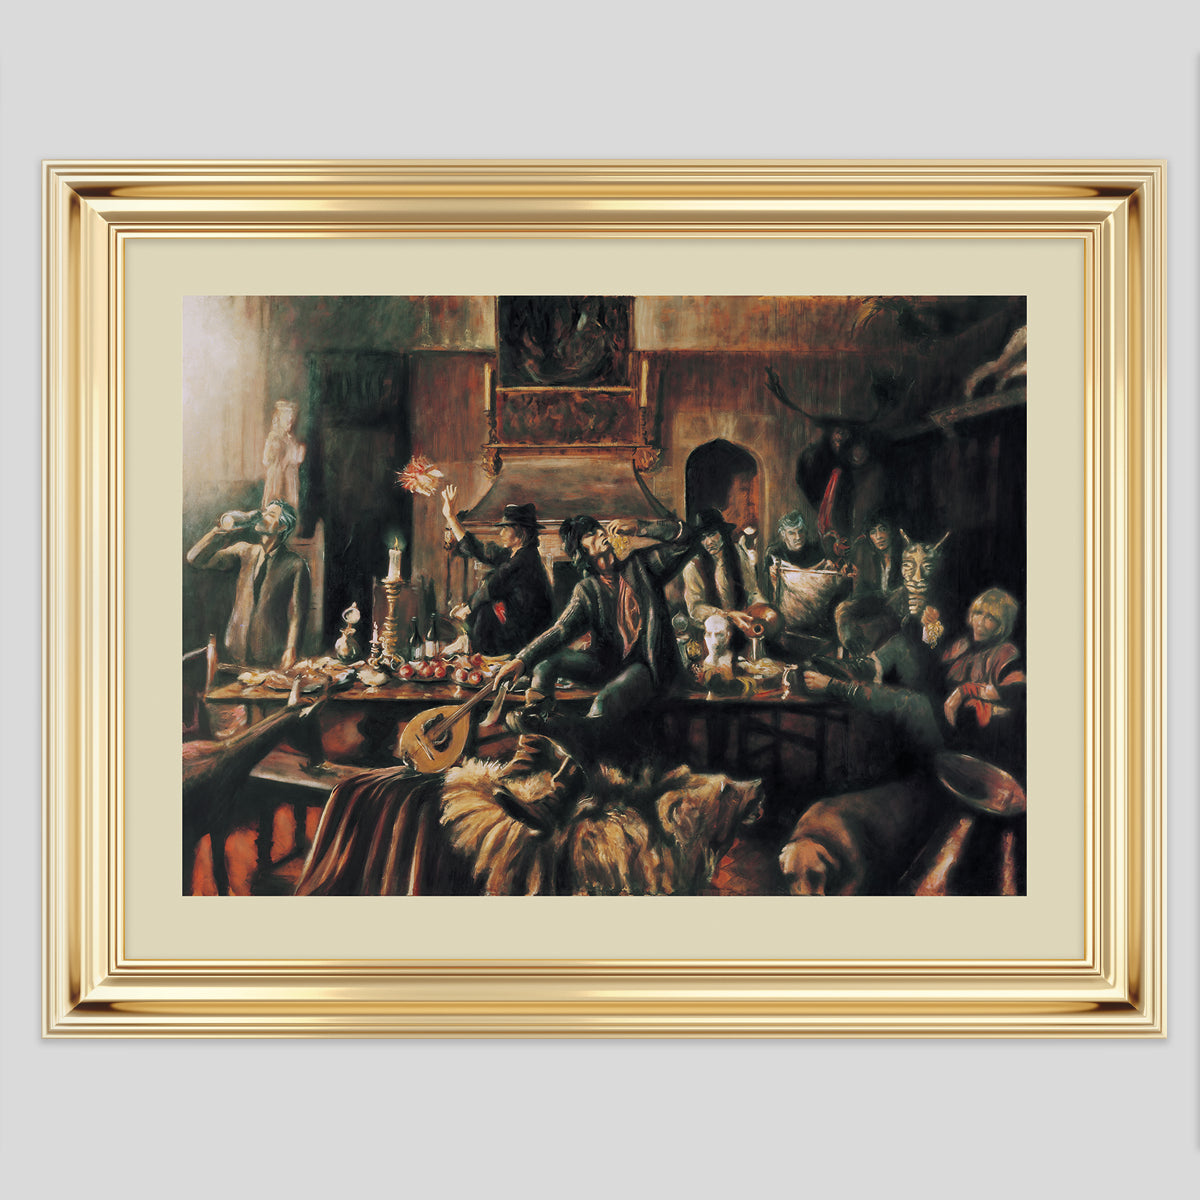 Ronnie Wood - Beggars Banquet 25 (Large)